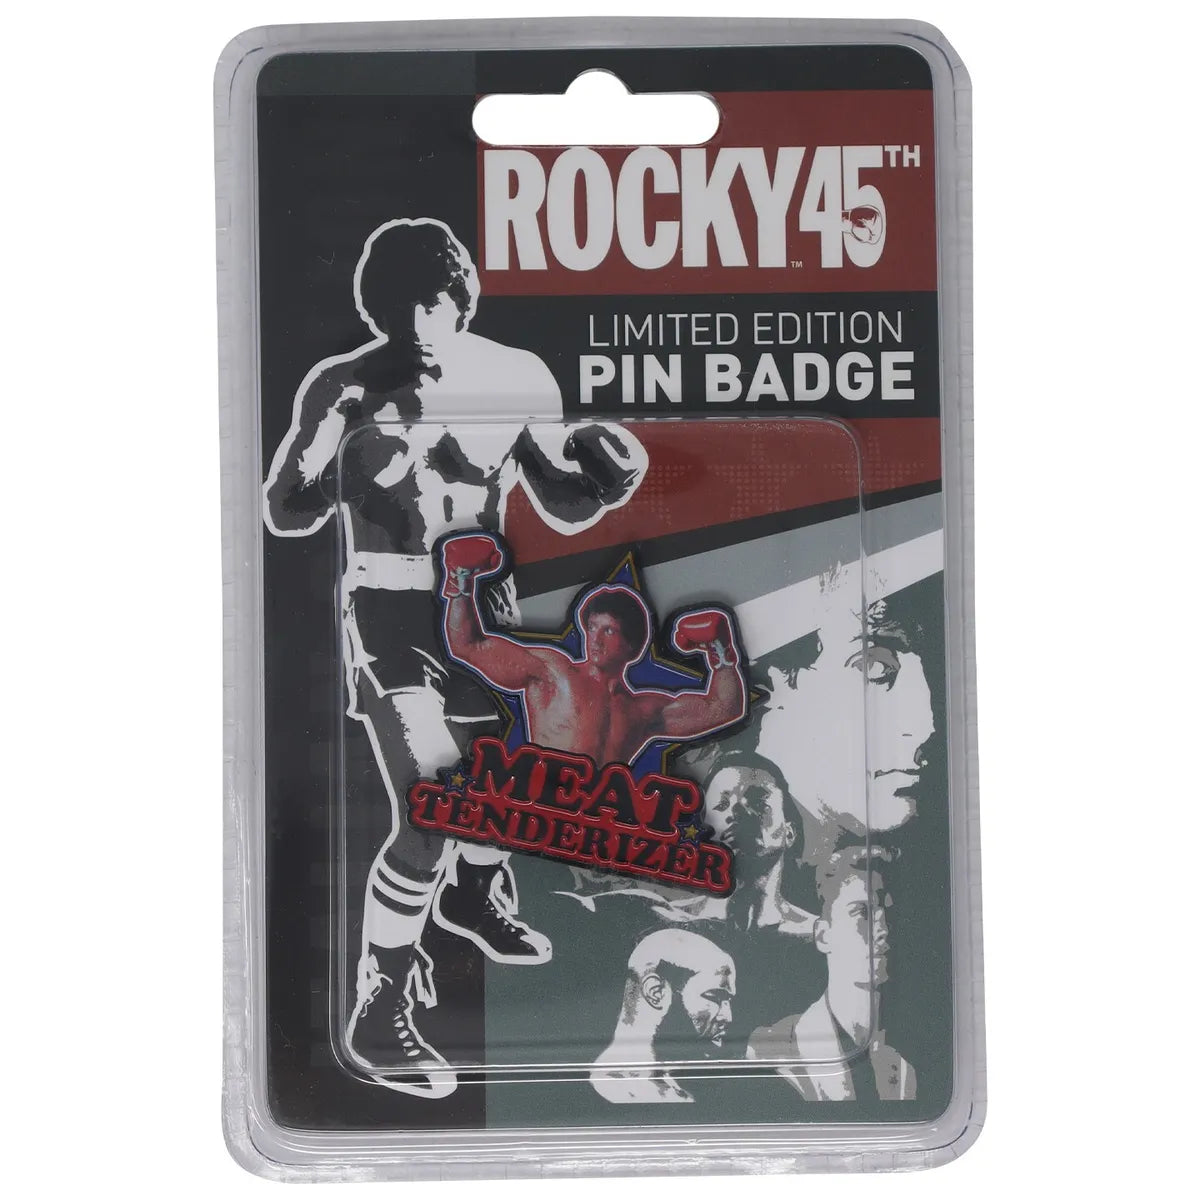 Rocky 45th Anniversary Limited Edition Pin Badge